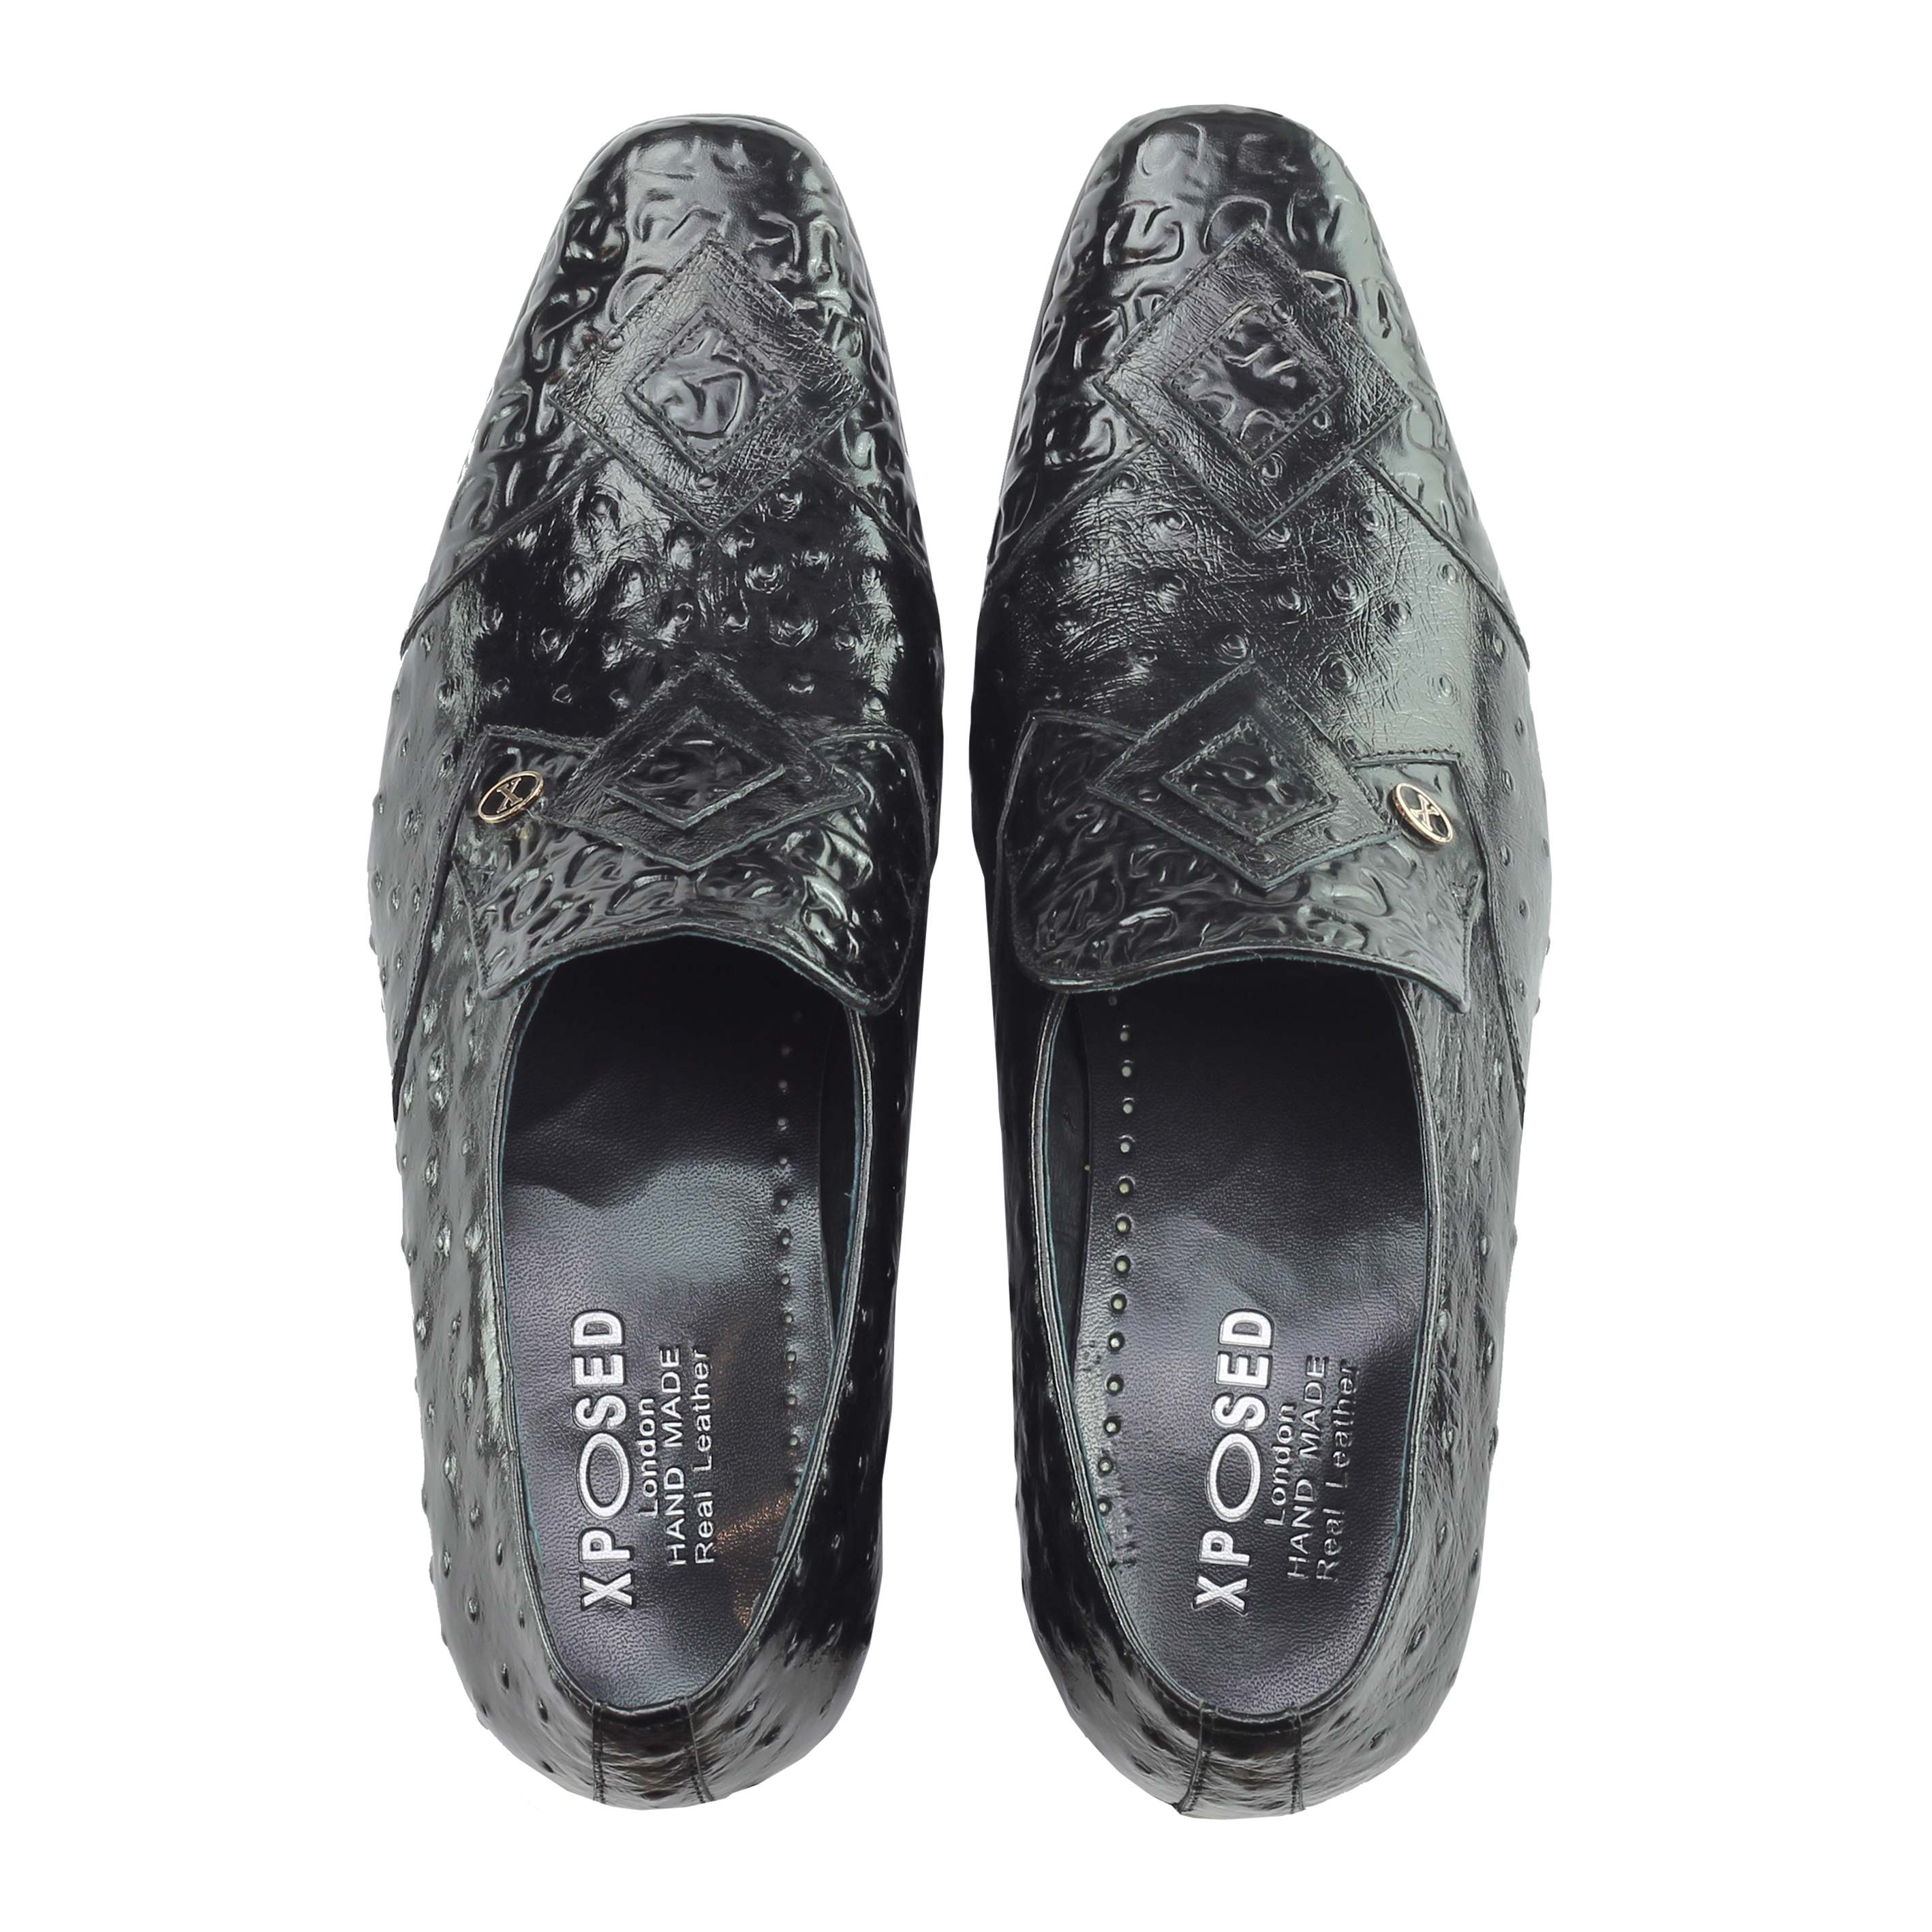 Mens Black Real Leather Ostrich Skin Print Smart Office Party Loafer Dress Shoes